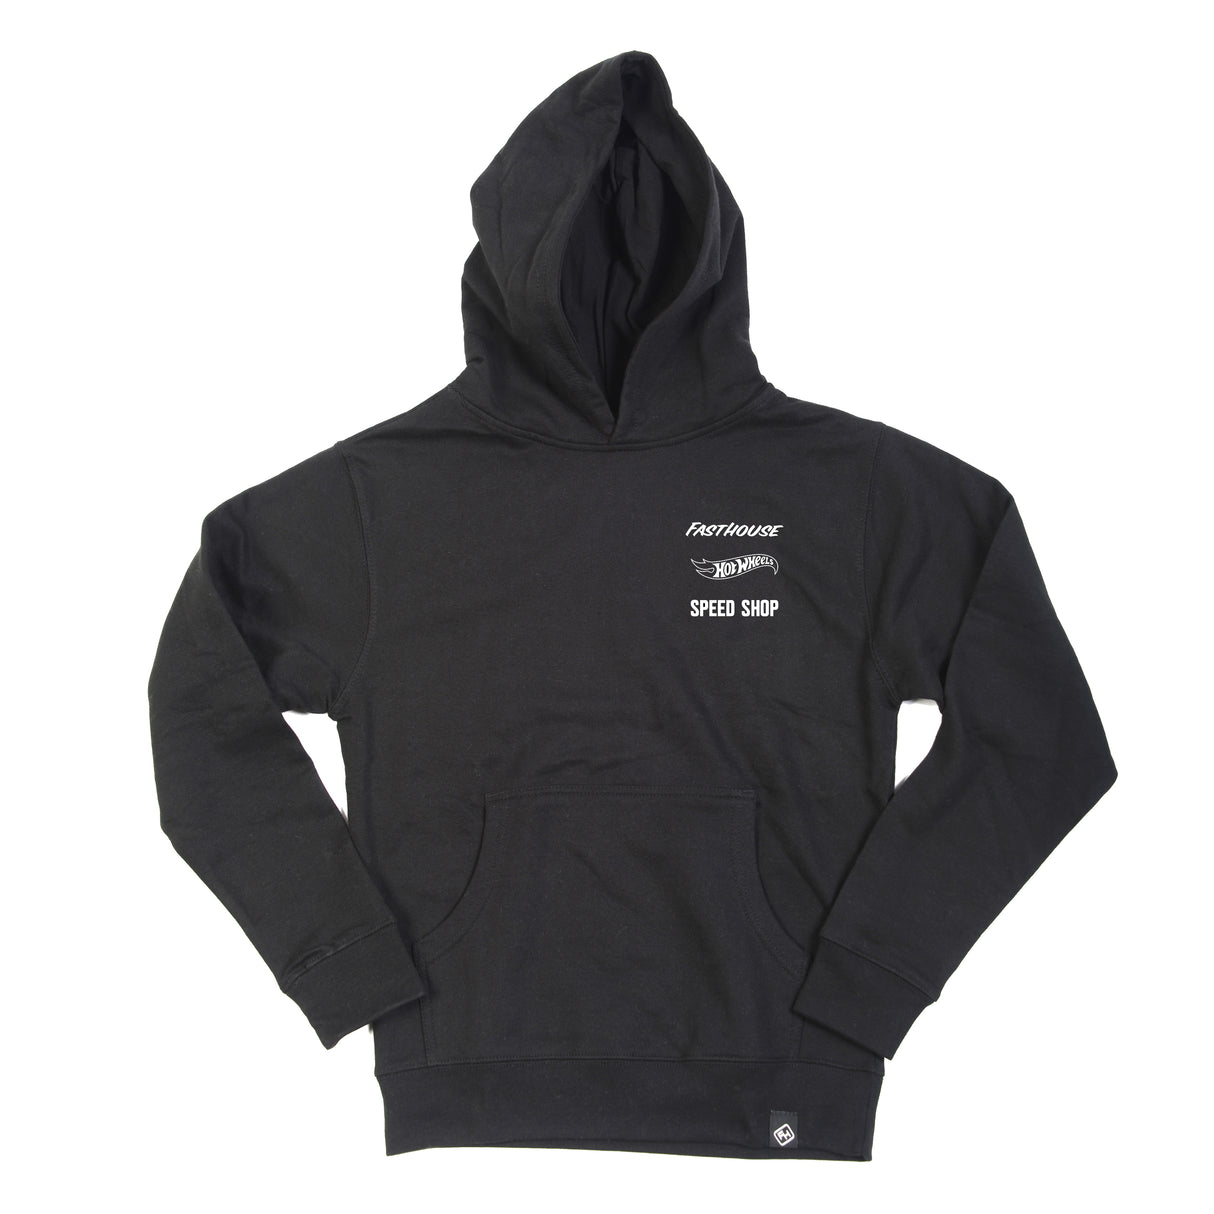 Fasthouse Rush Hot Wheels Hooded Pullover